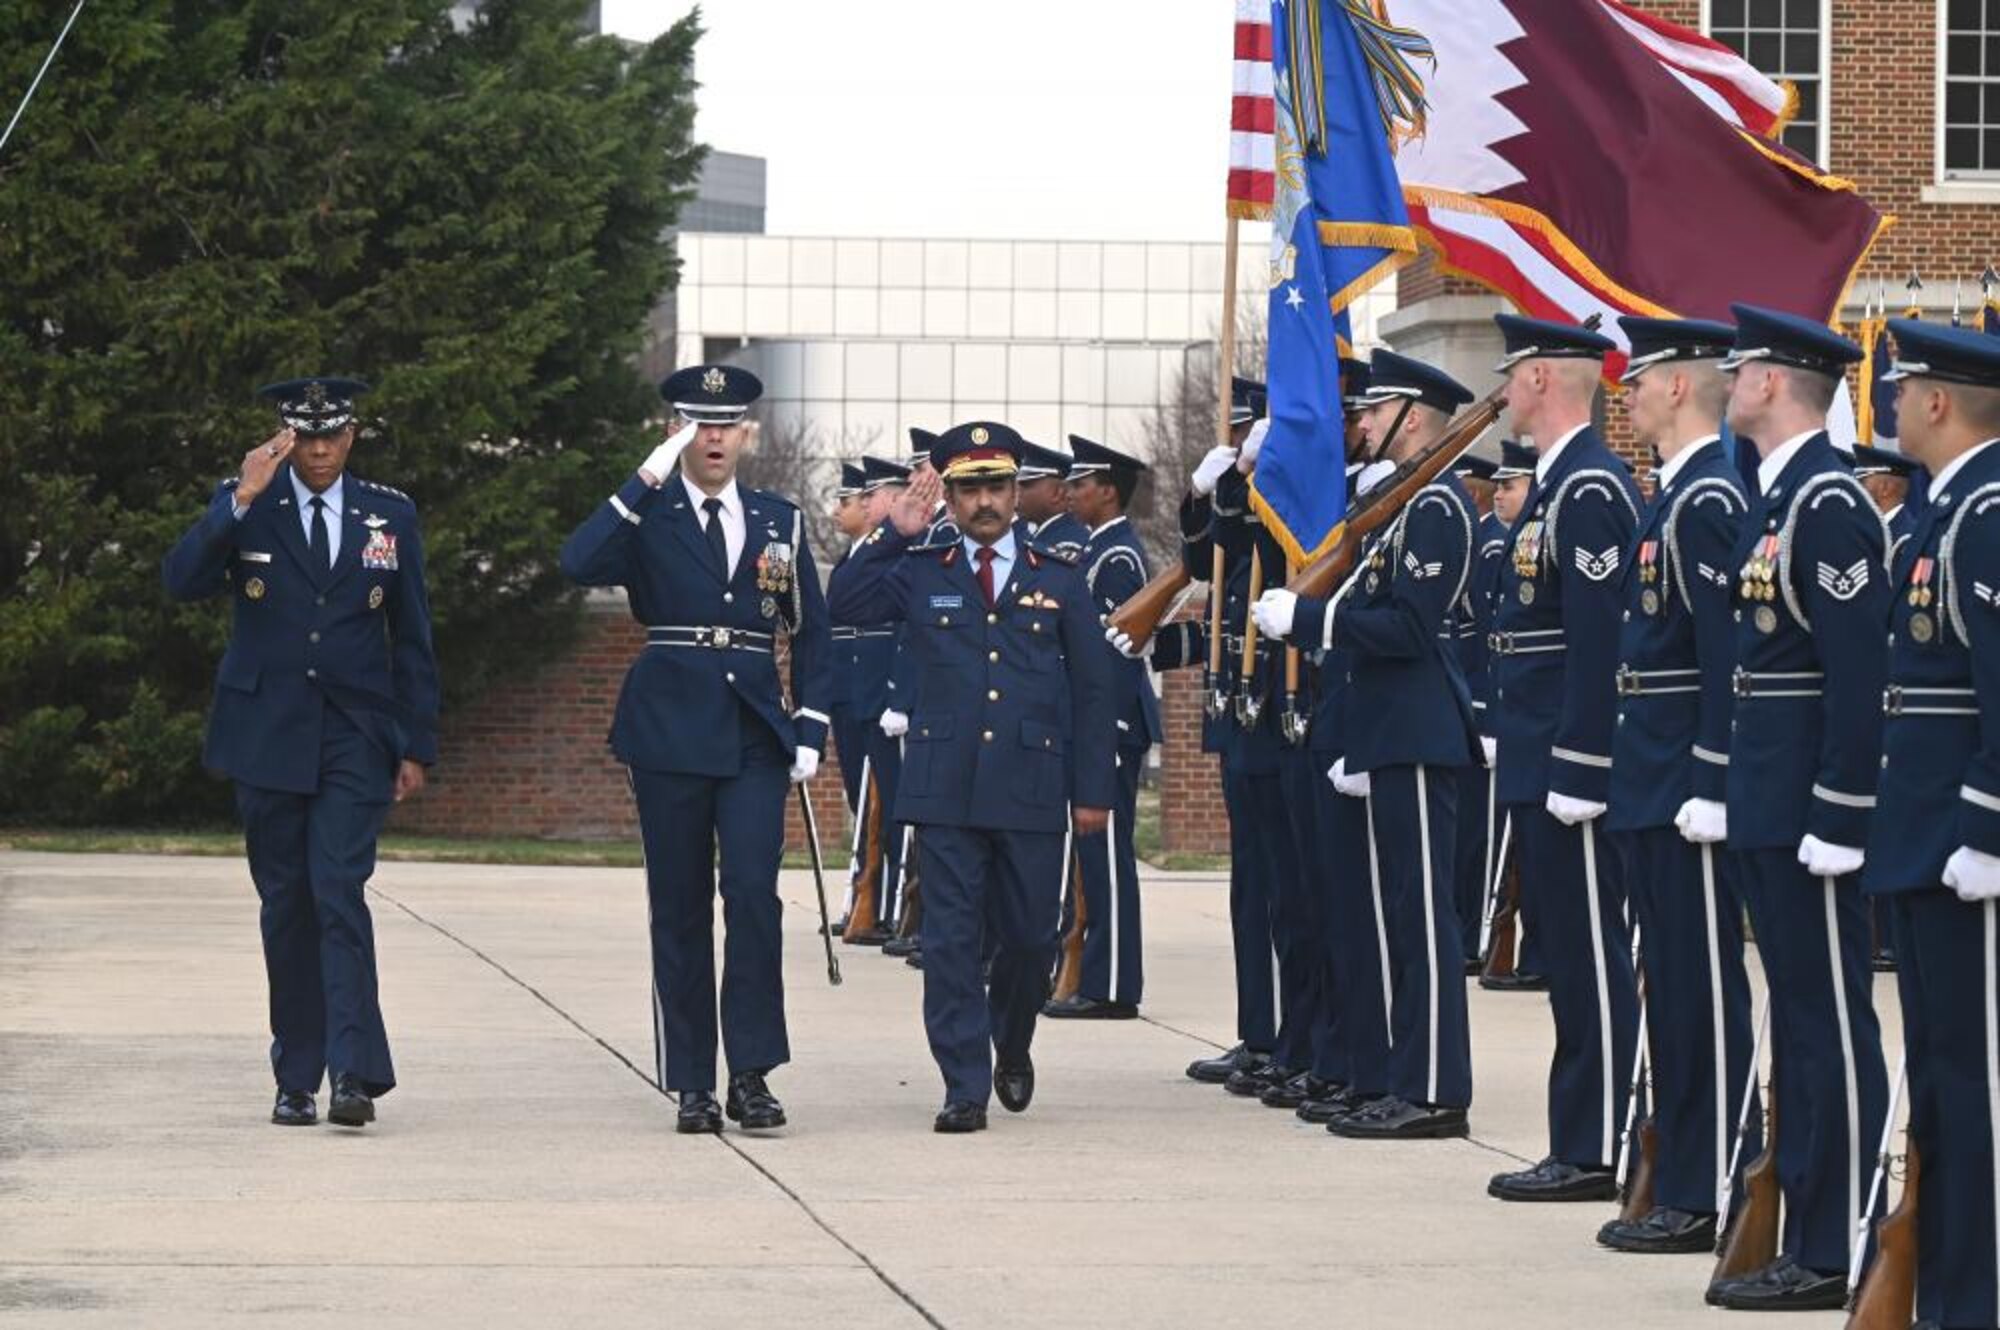 Air Force Chief of Staff Gen. CQ Brown, Jr. and Qatar Emiri Air Force Commander Maj. Gen. Jassim Al-Mannai inspect the Honor Guard during a welcome ceremony at Joint Base Anacostia-Bolling, Washington, D.C., March 16, 2023. The visit furthered the strong U.S.-Qatar partnership. (U.S. Air Force photo by Andy Morataya)